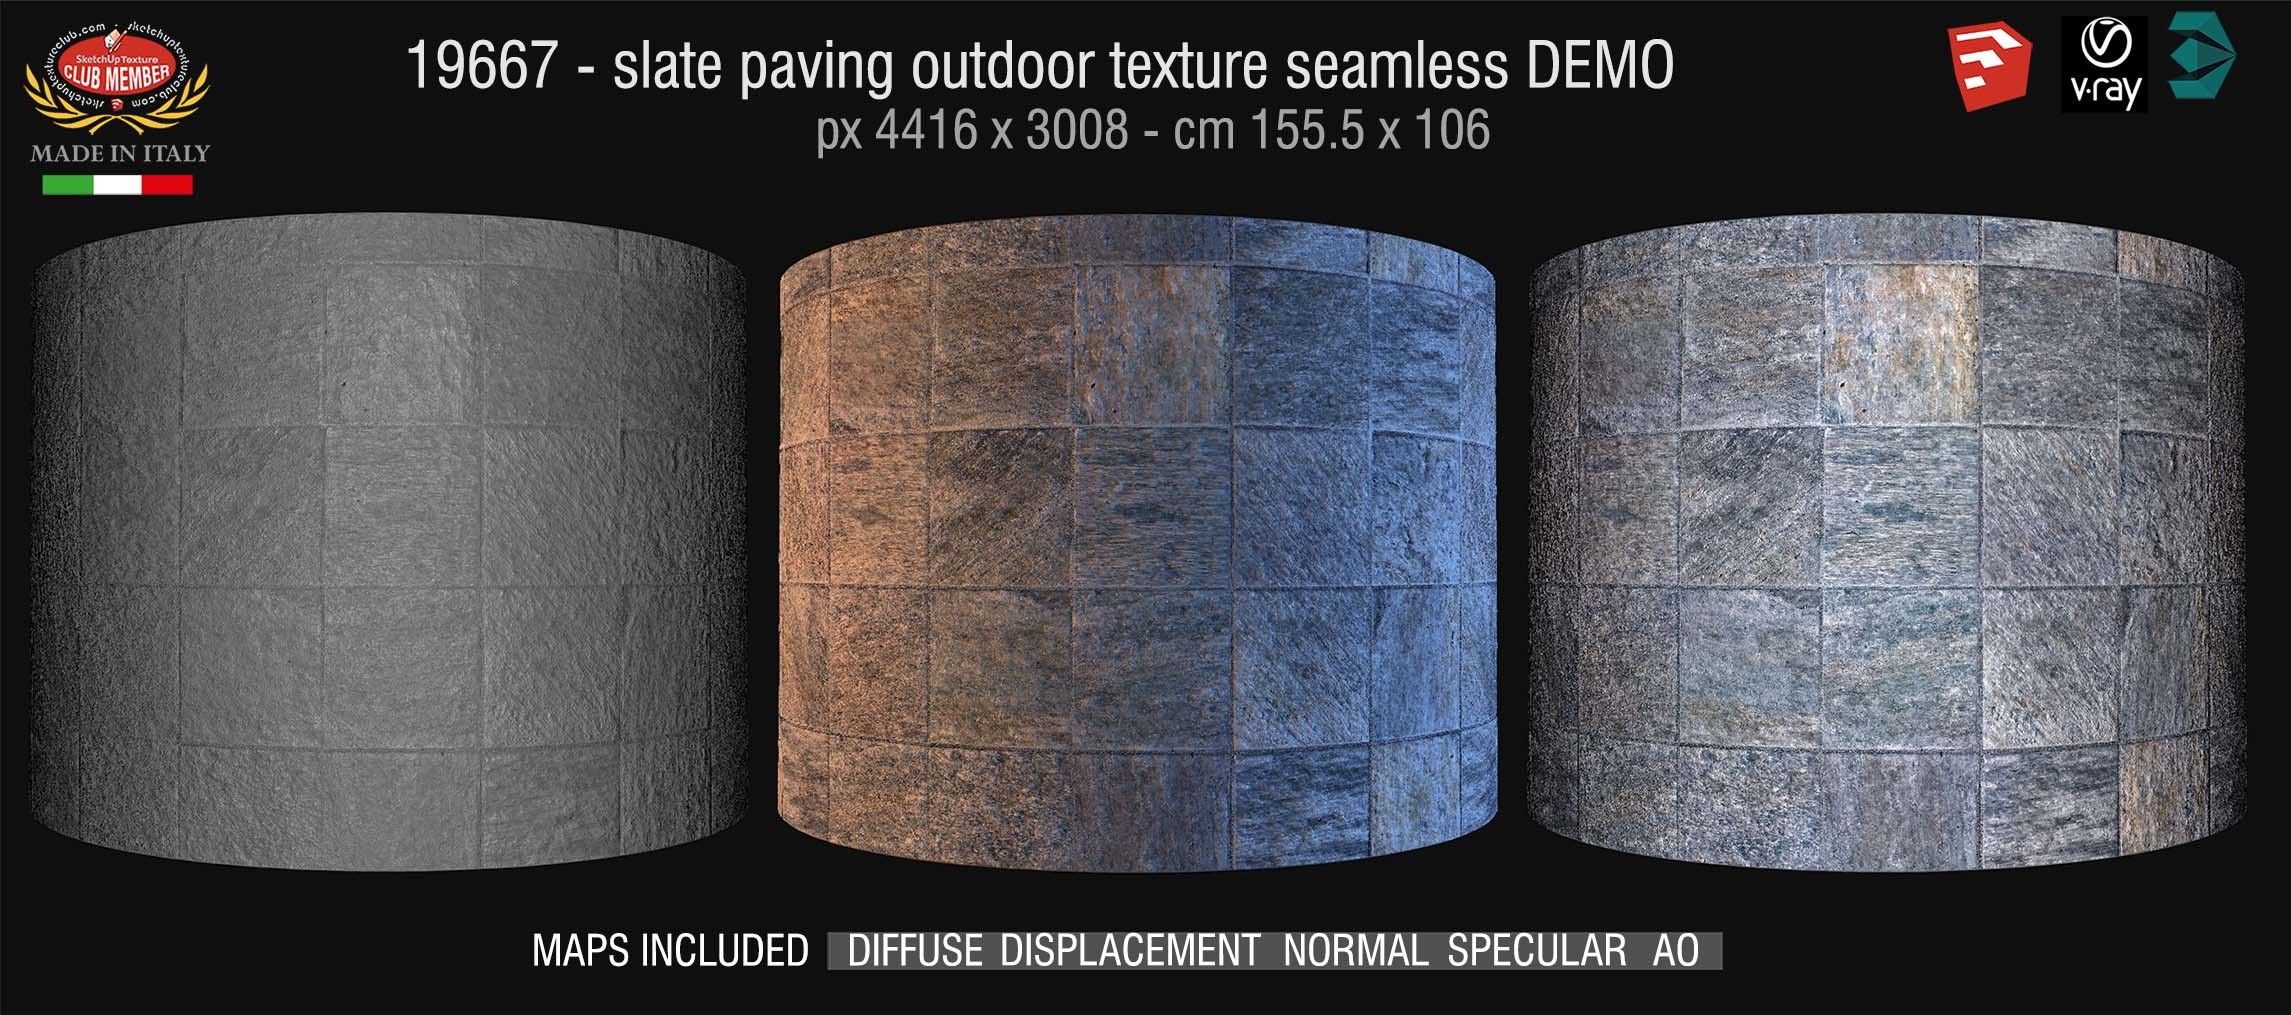 19667 HR Slate paving outdoor texture seamless + maps demo